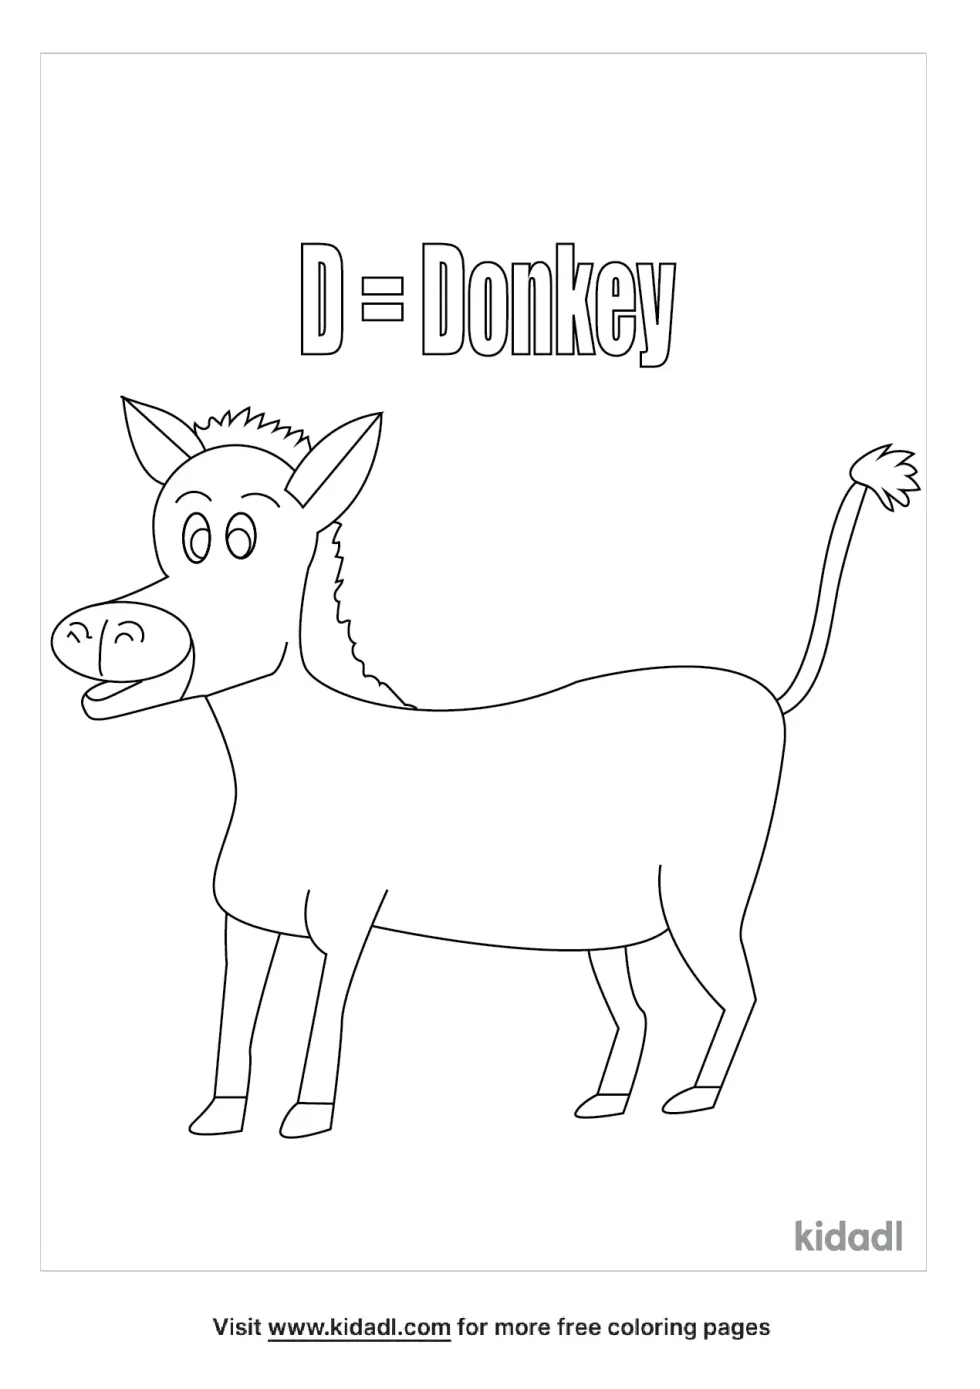 D Is For Donkey Coloring Page